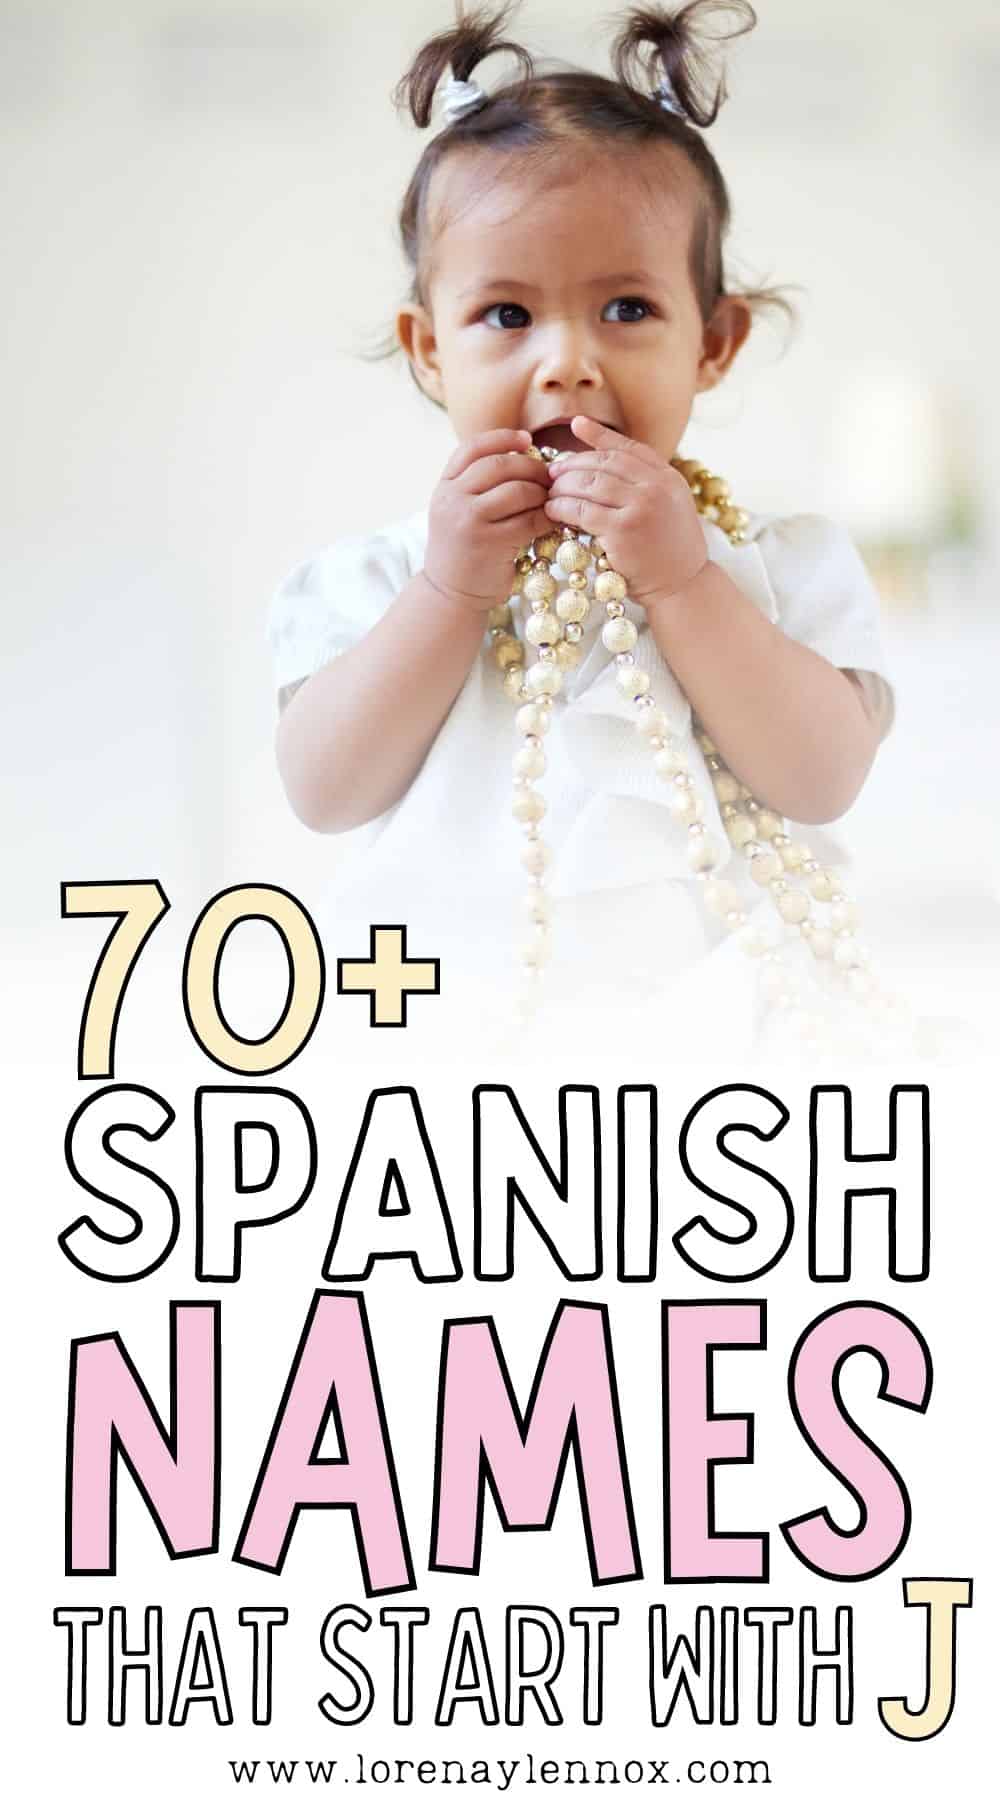 70+ Spanish Names that Start With J